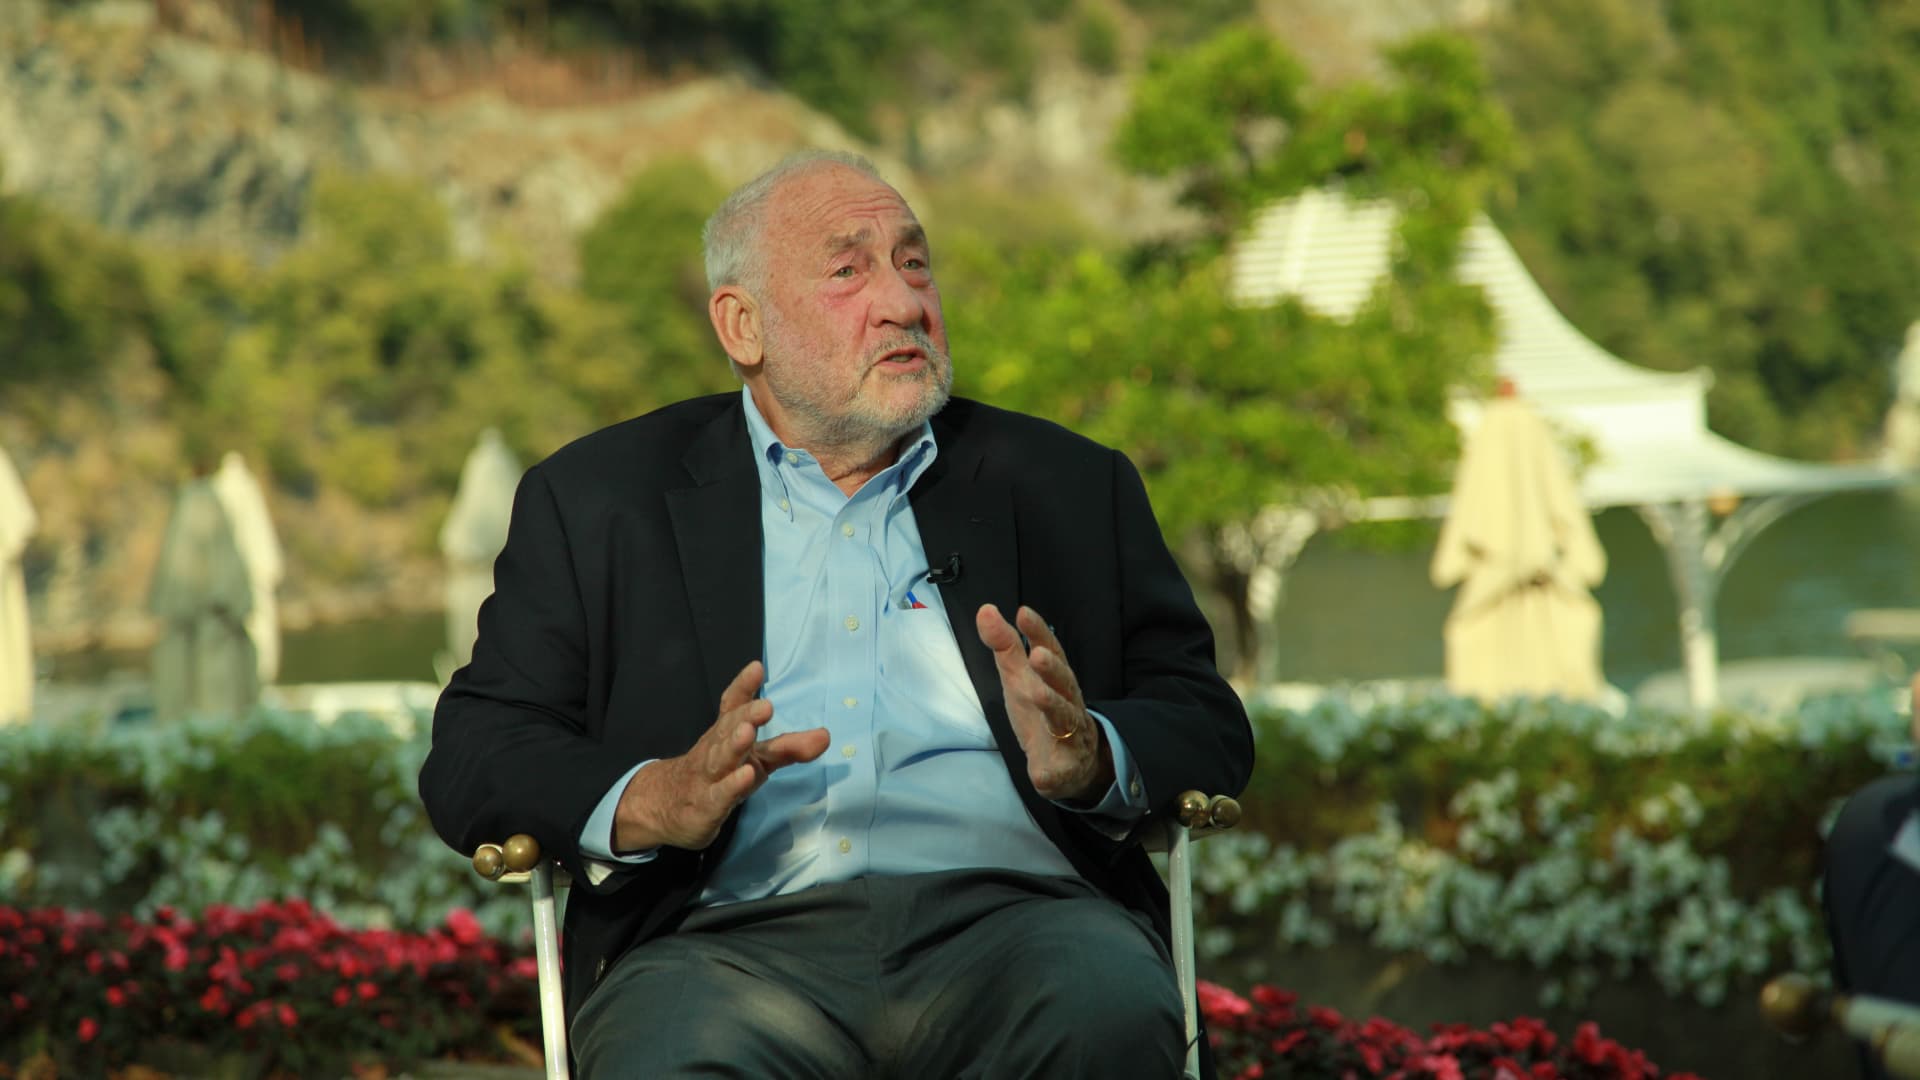 Economist Joseph Stiglitz says there are 3 reasons why further